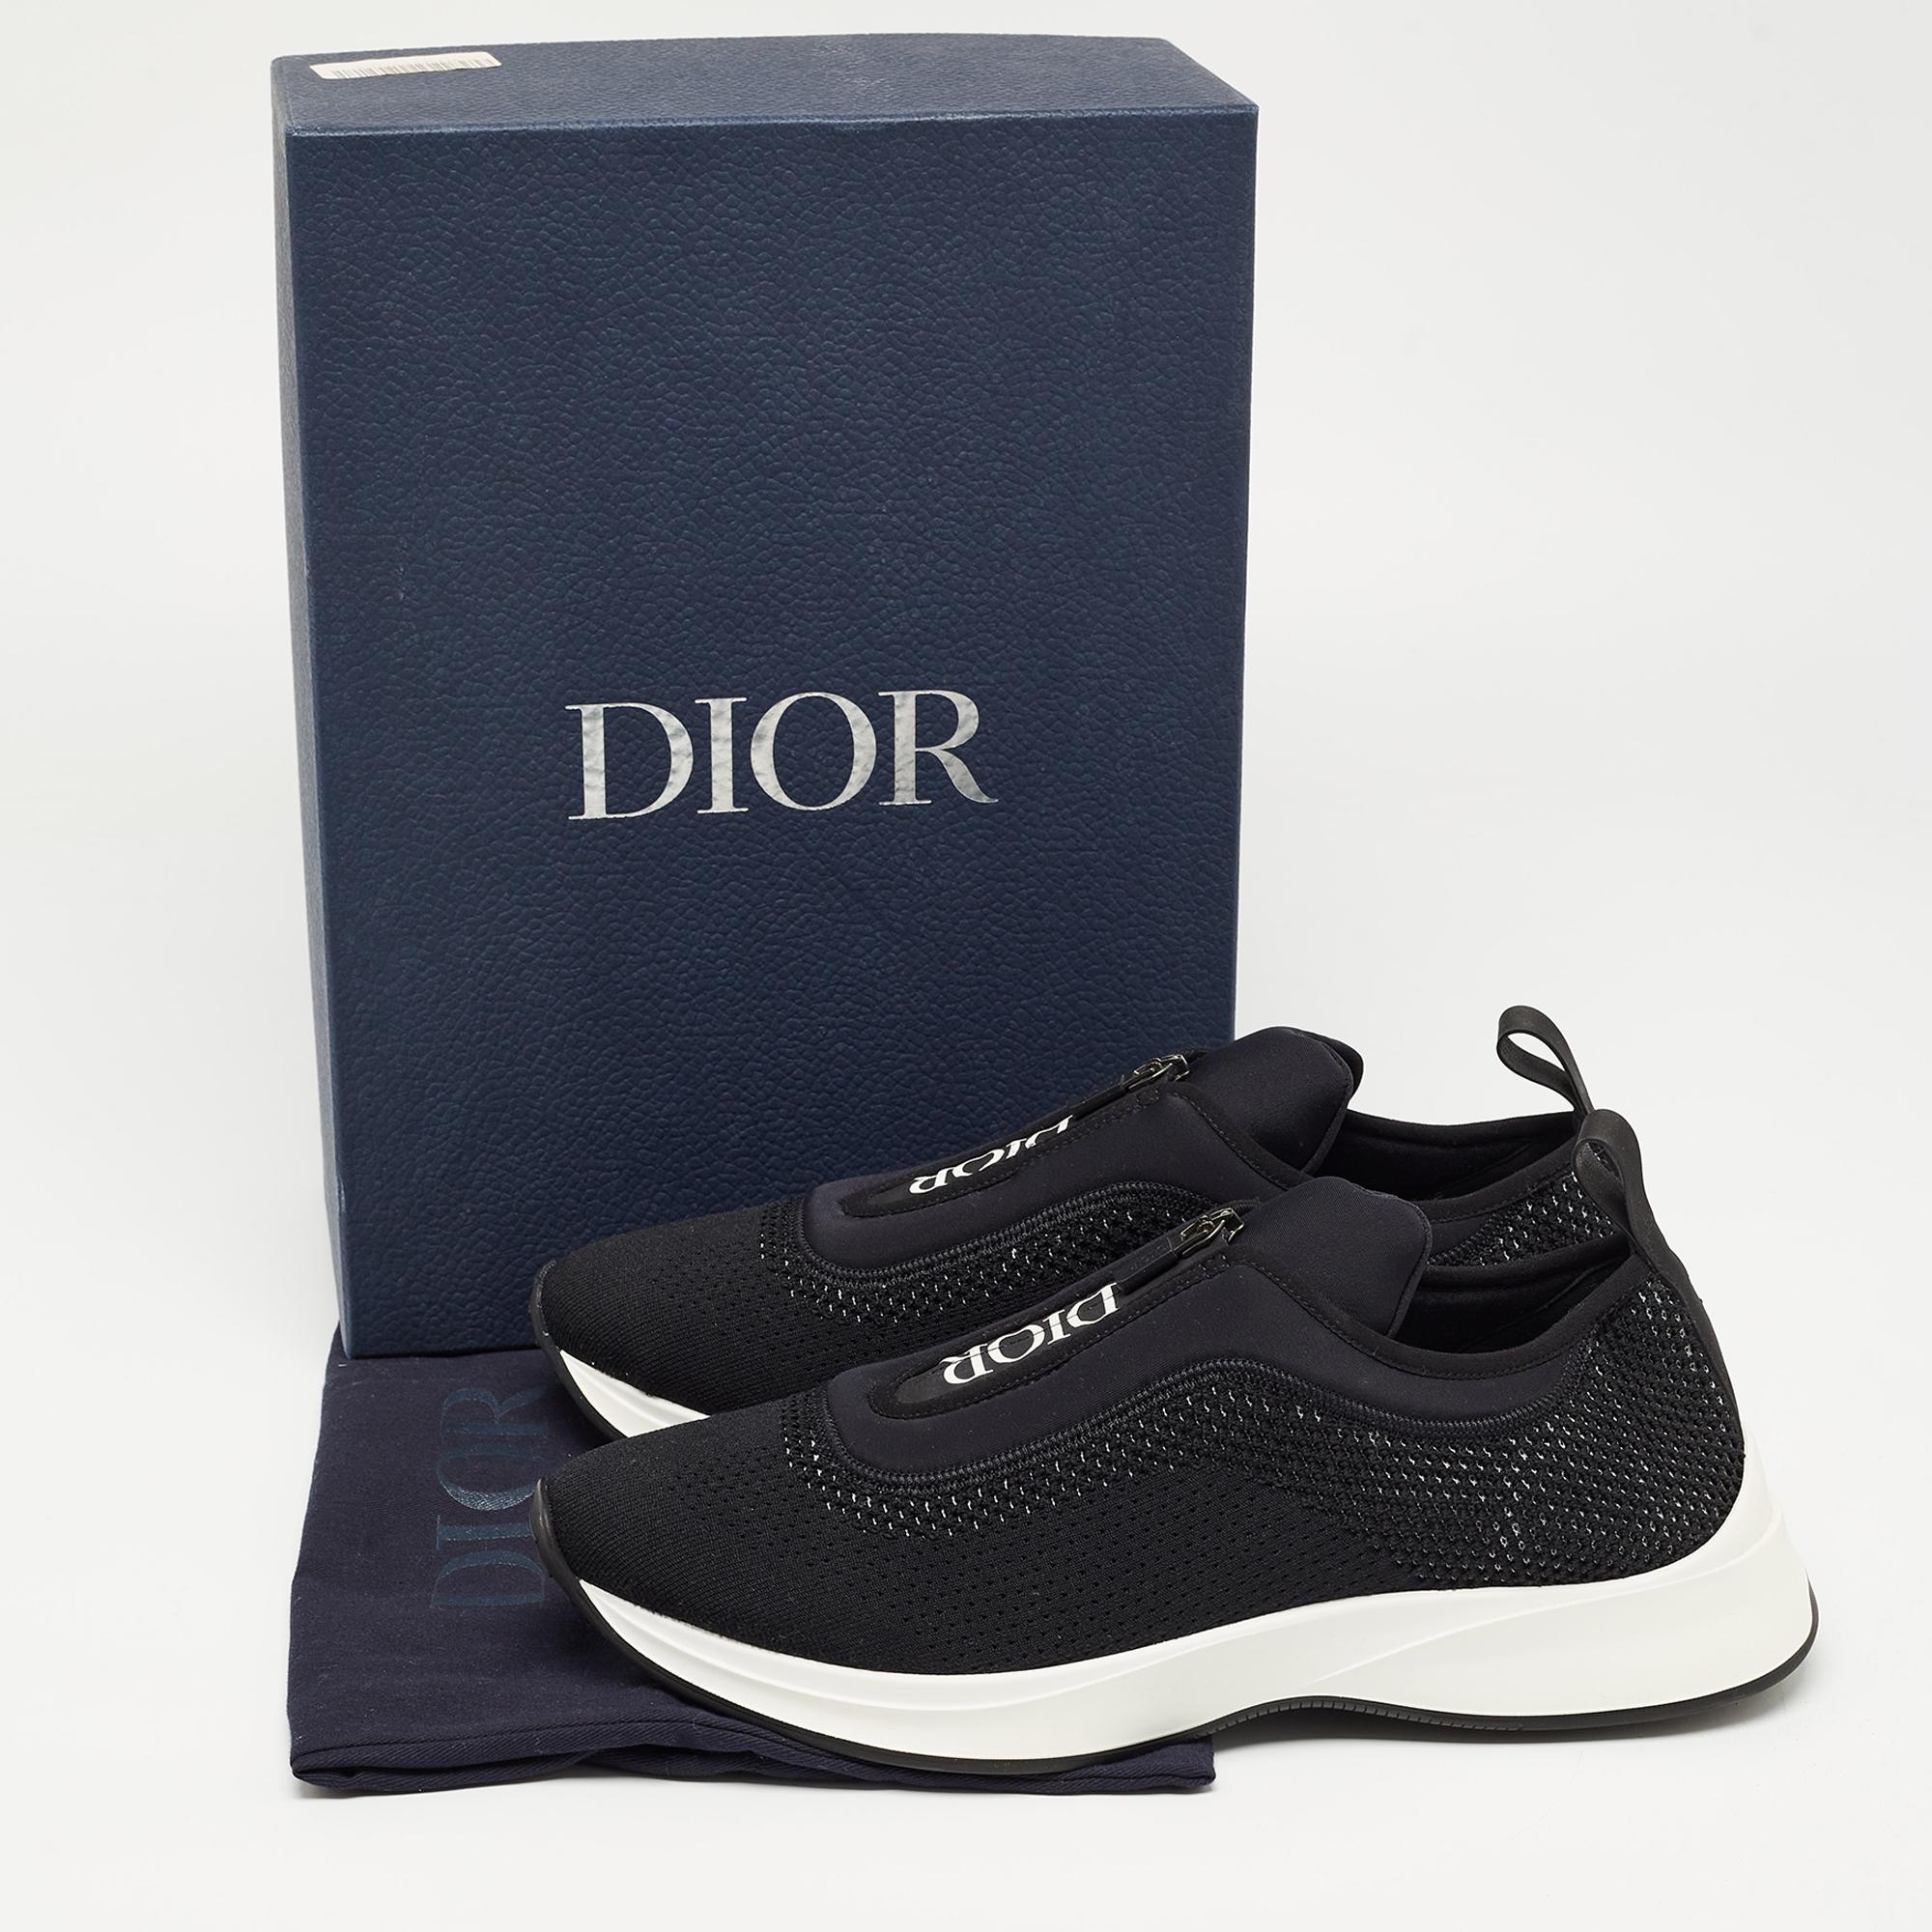 Dior Black Knit Fabric and Neoprene B25 Slip On Sneakers Size 45 5